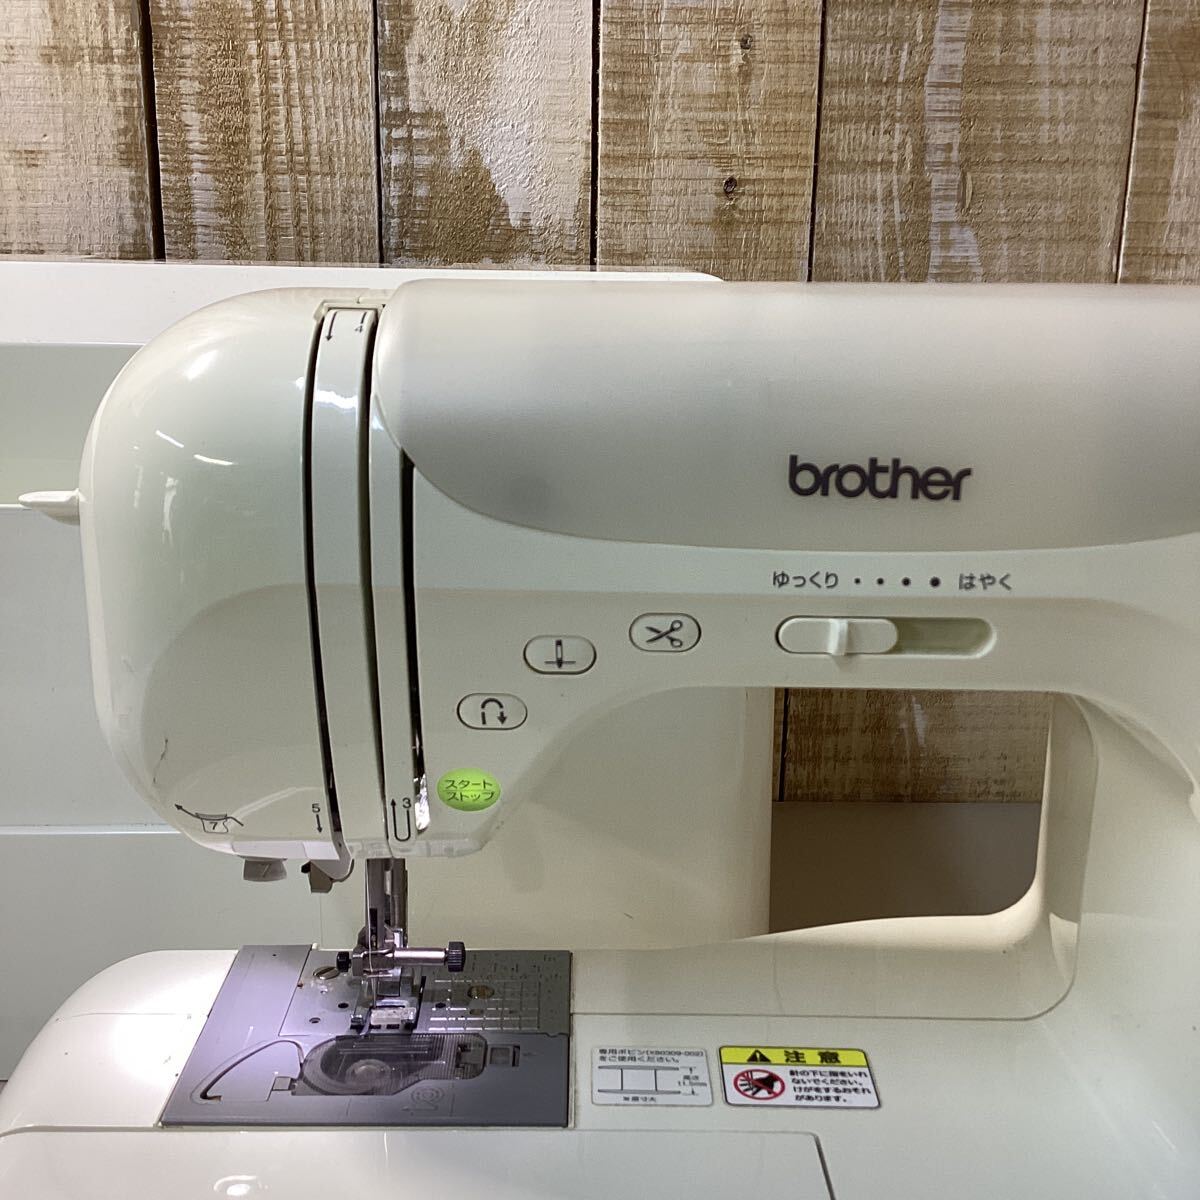 brother Brother sewing machine CPS5228 computer sewing machine sewing handicrafts handcraft 